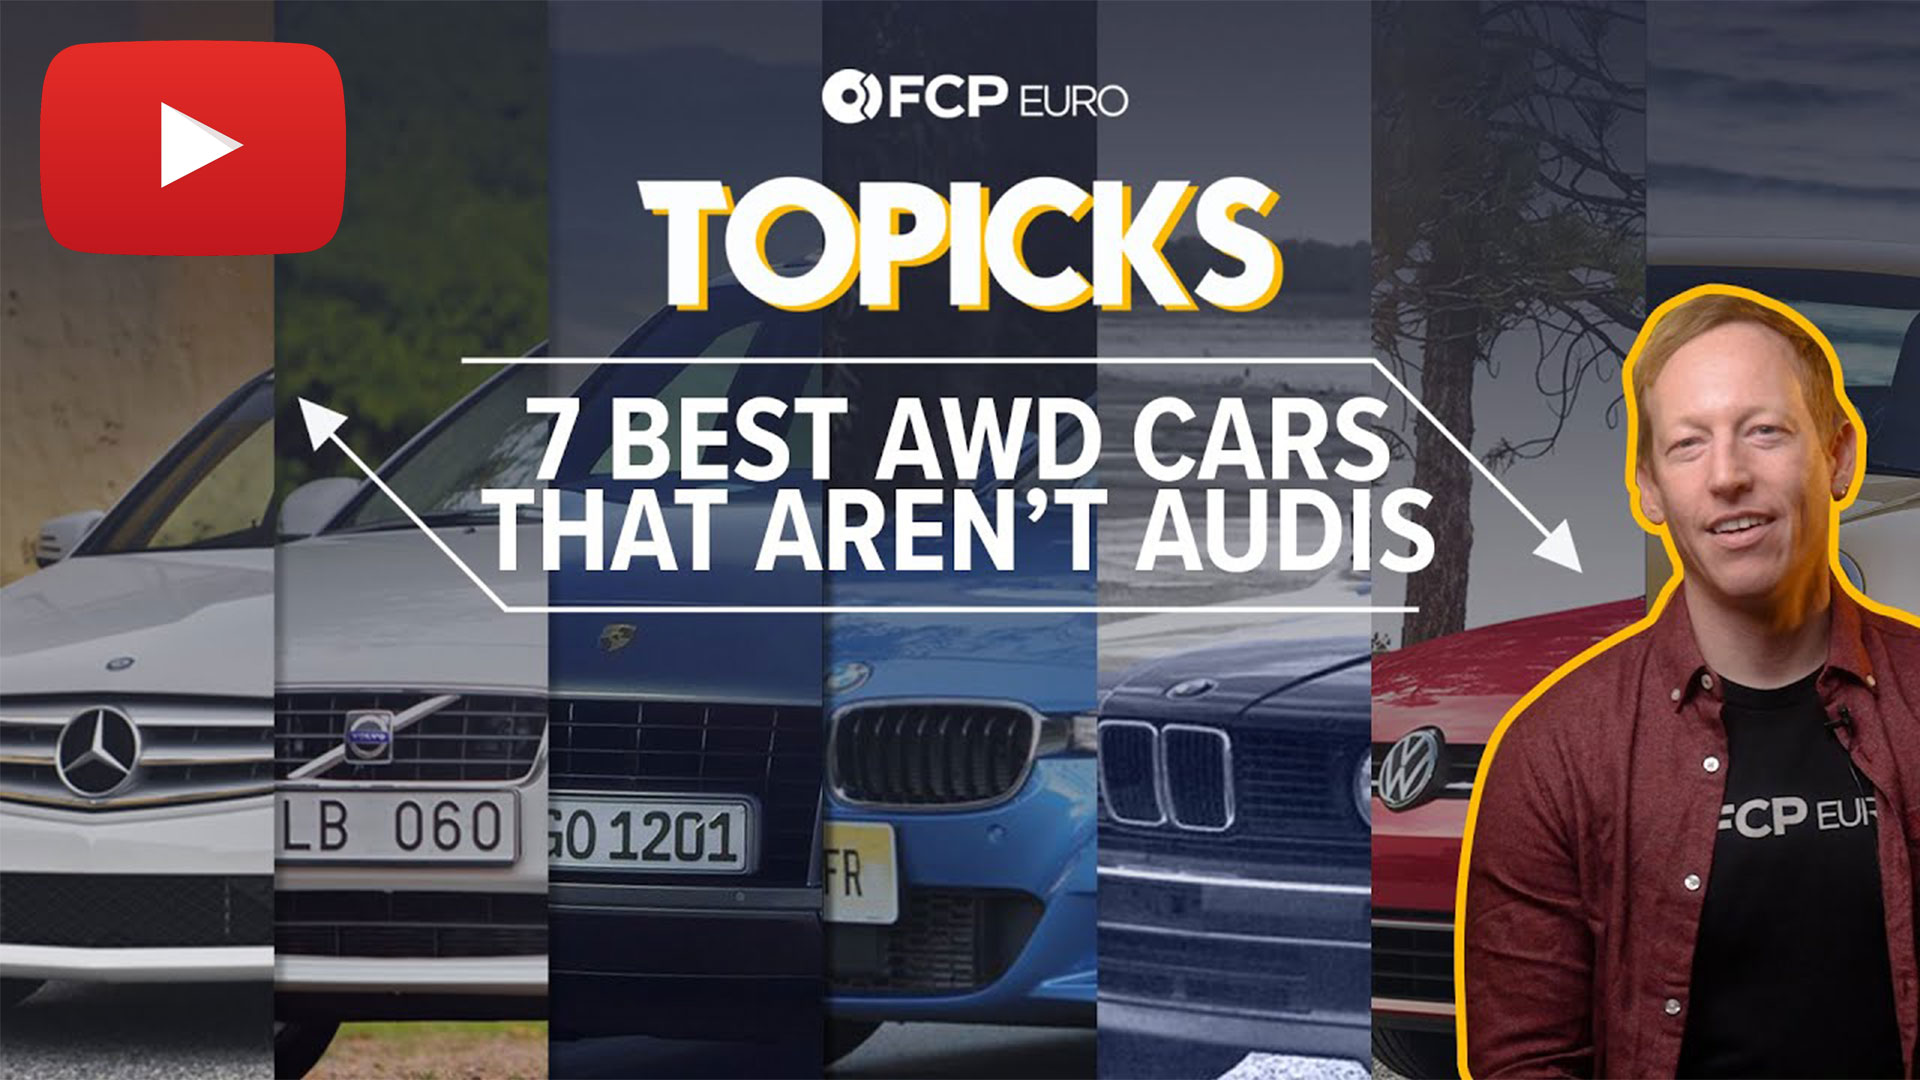 7 Of The Best Used All-Wheel Drive Cars That Aren't Audis